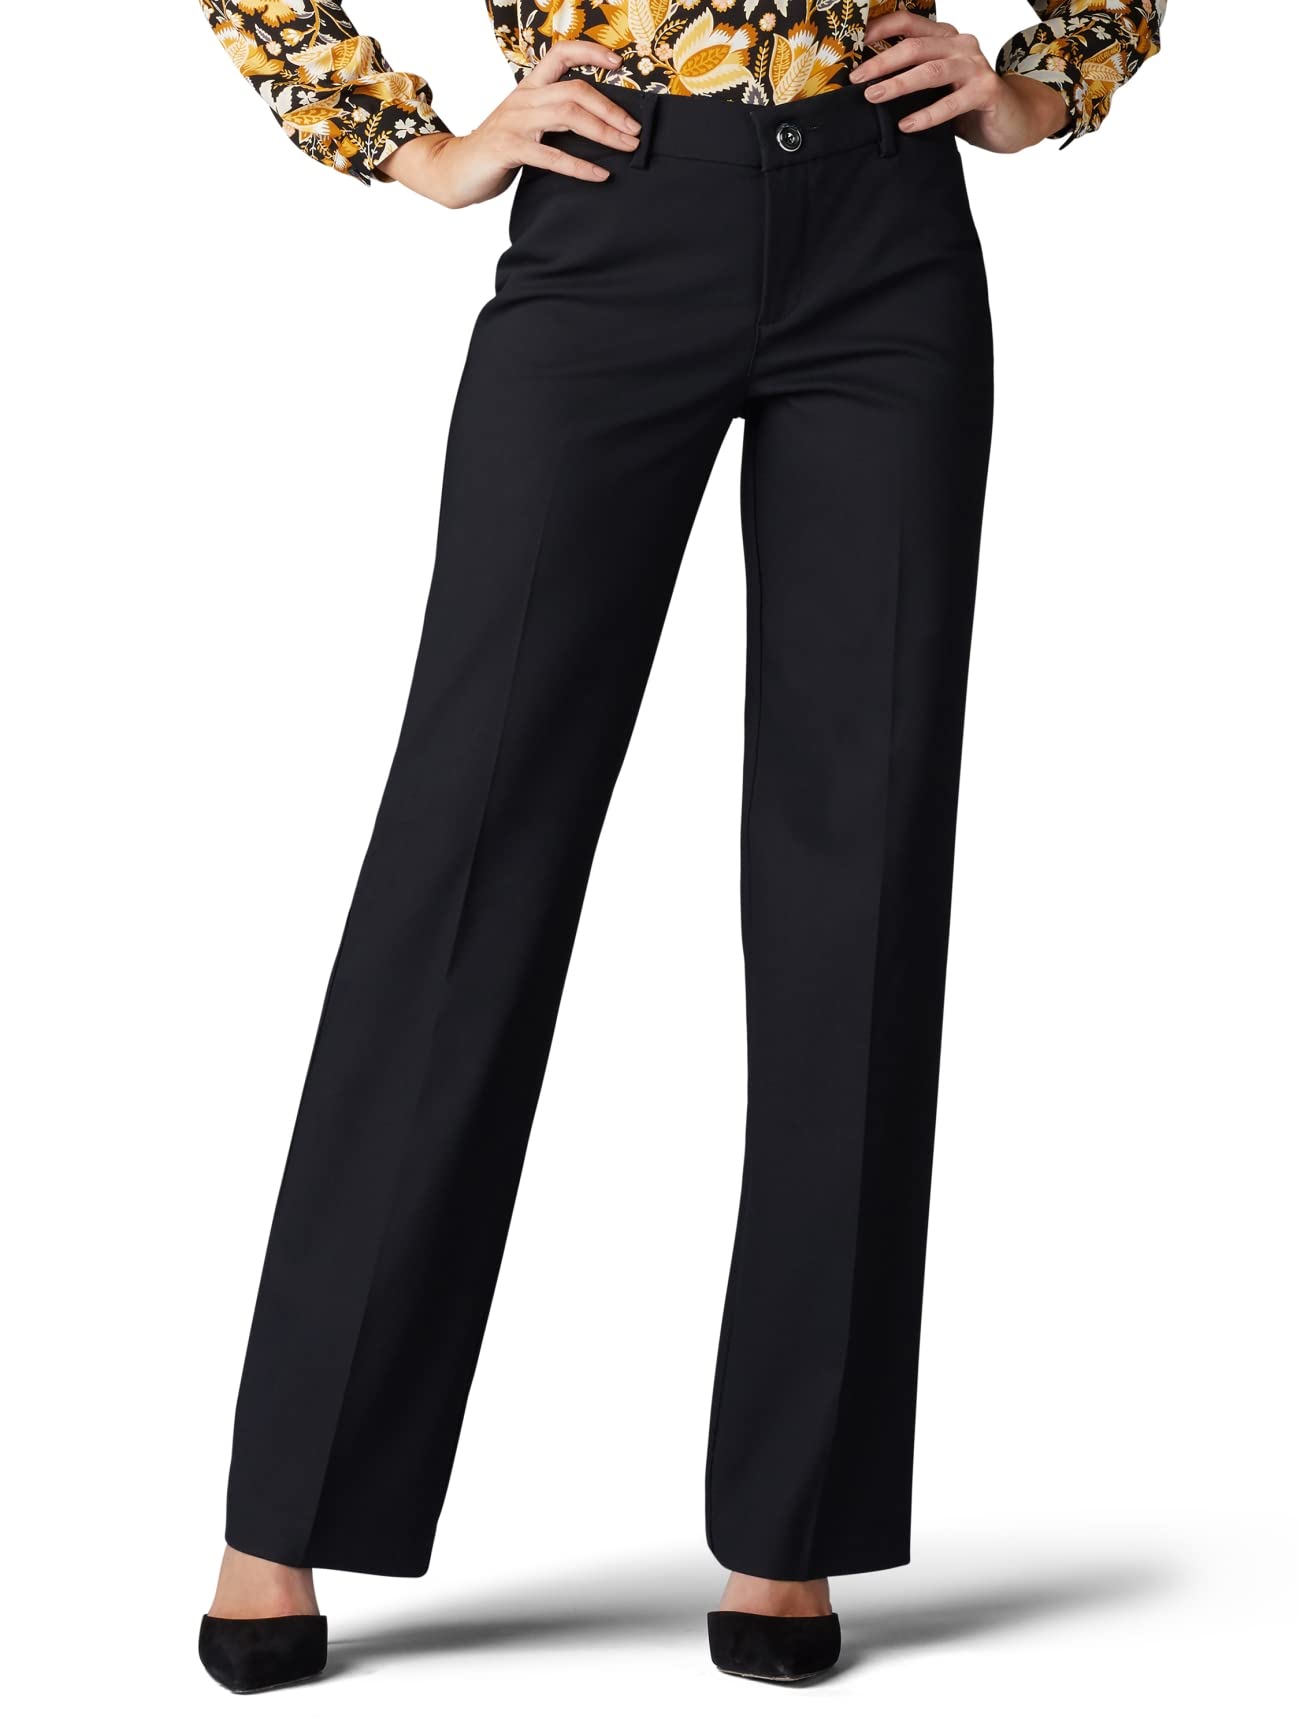 Lee Women's Ultra Lux Comfort with Flex Motion Trouser Pant